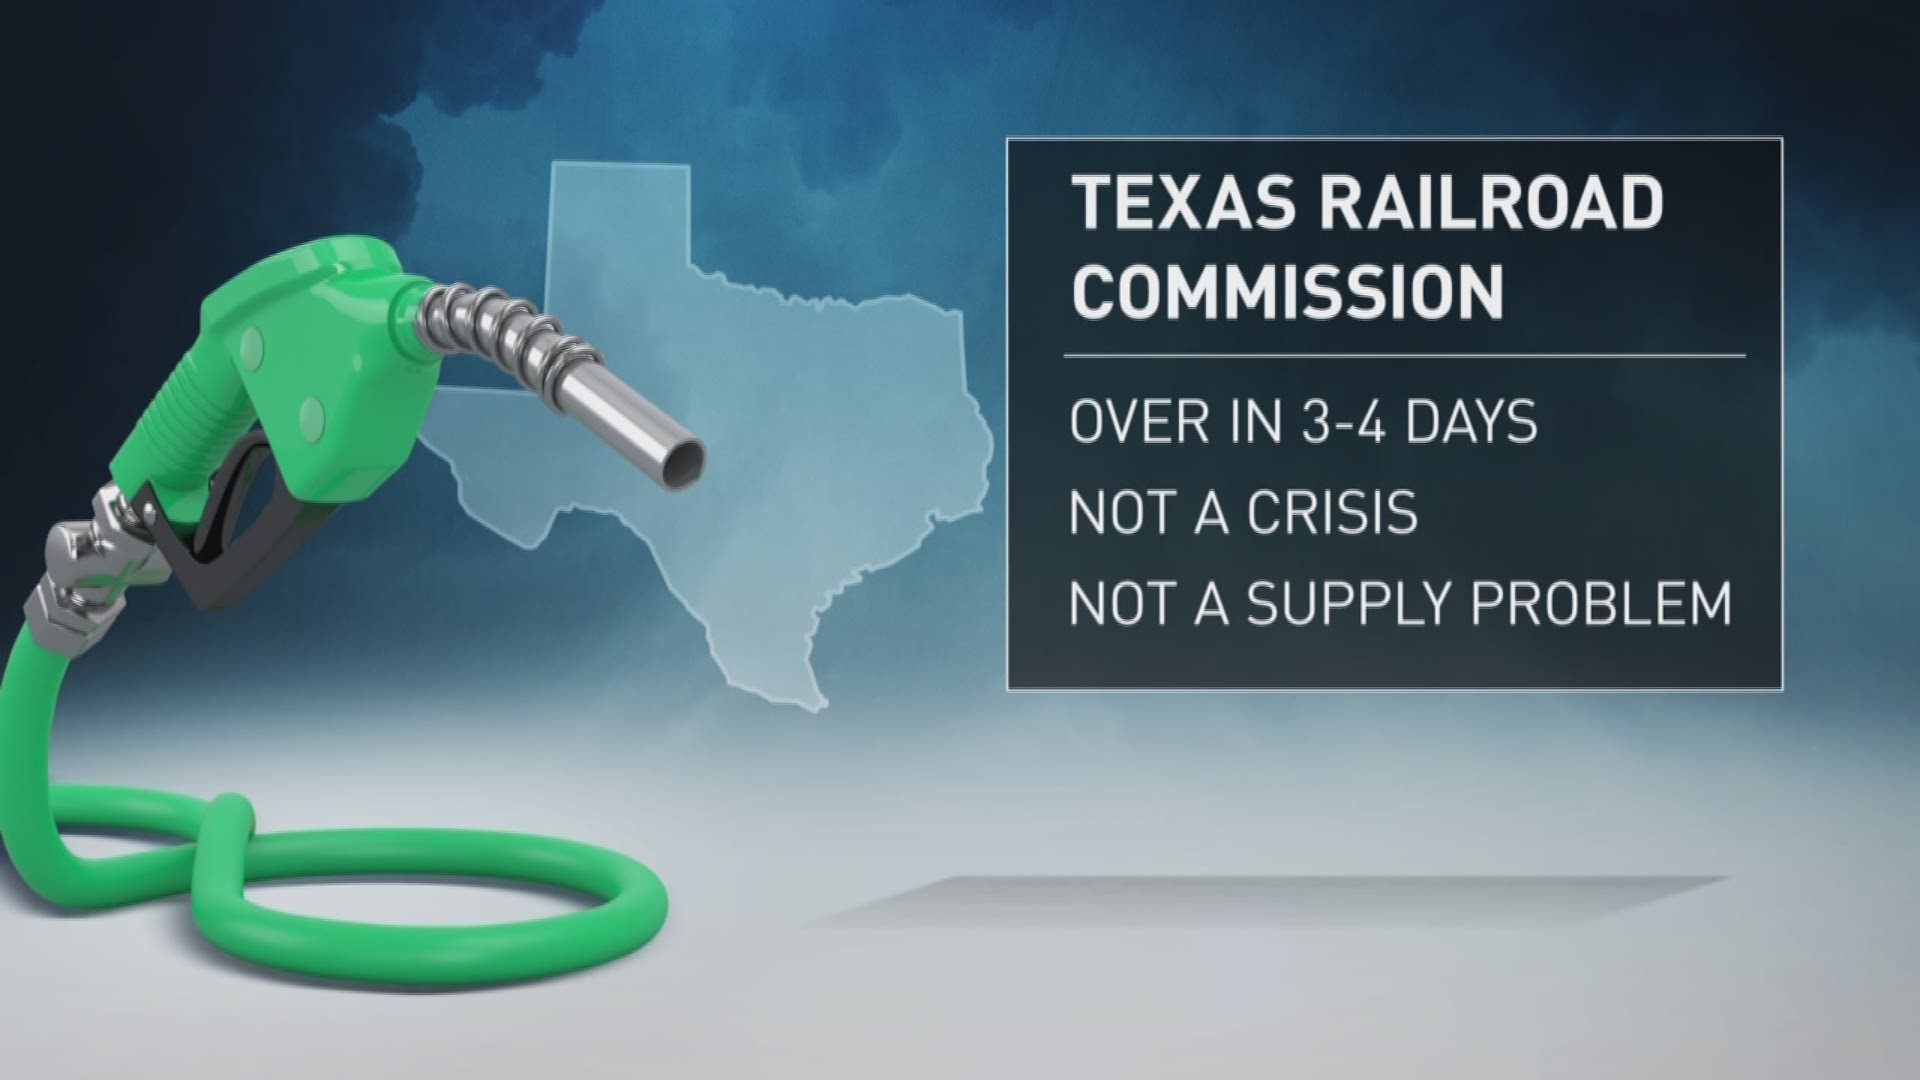 With multiple oil refineries shutting down due to Hurricane Harvey's impacts on the Gulf Coast, customers in the Austin-area and throughout Texas are reporting a shortage of gasoline.